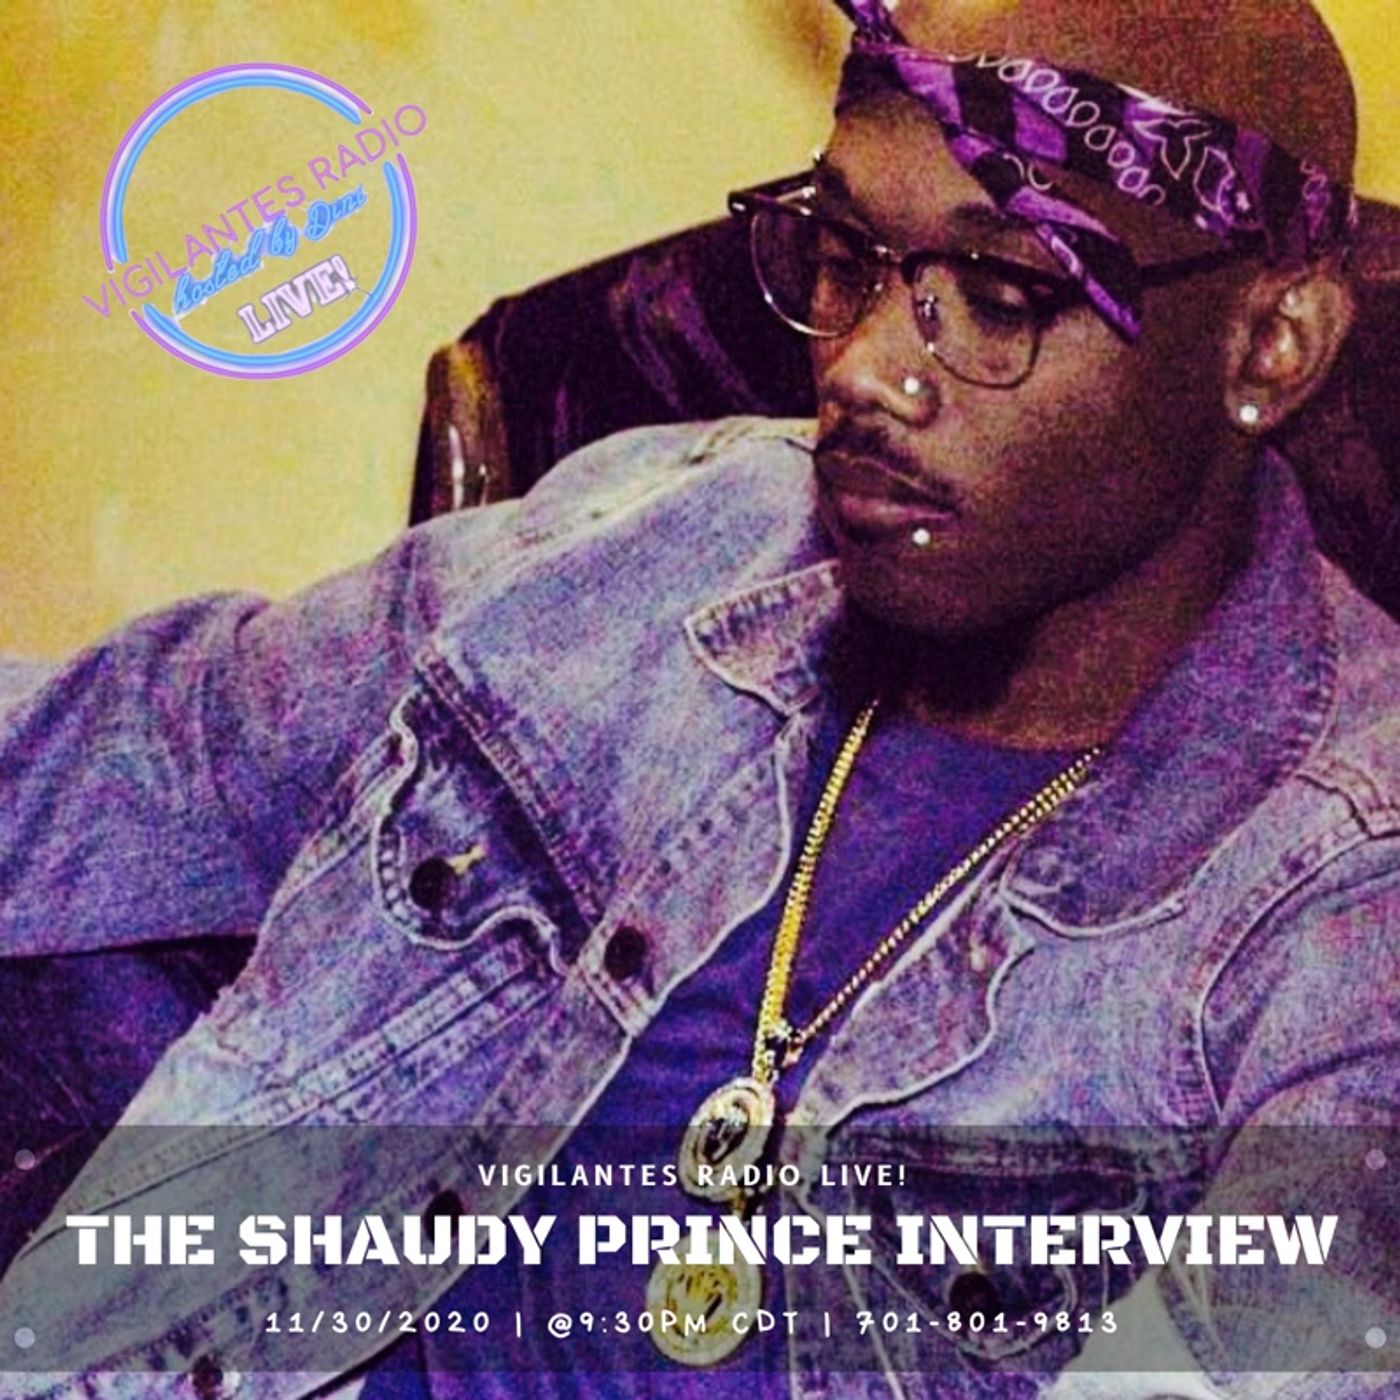 The Shaudy Prince Interview. Image